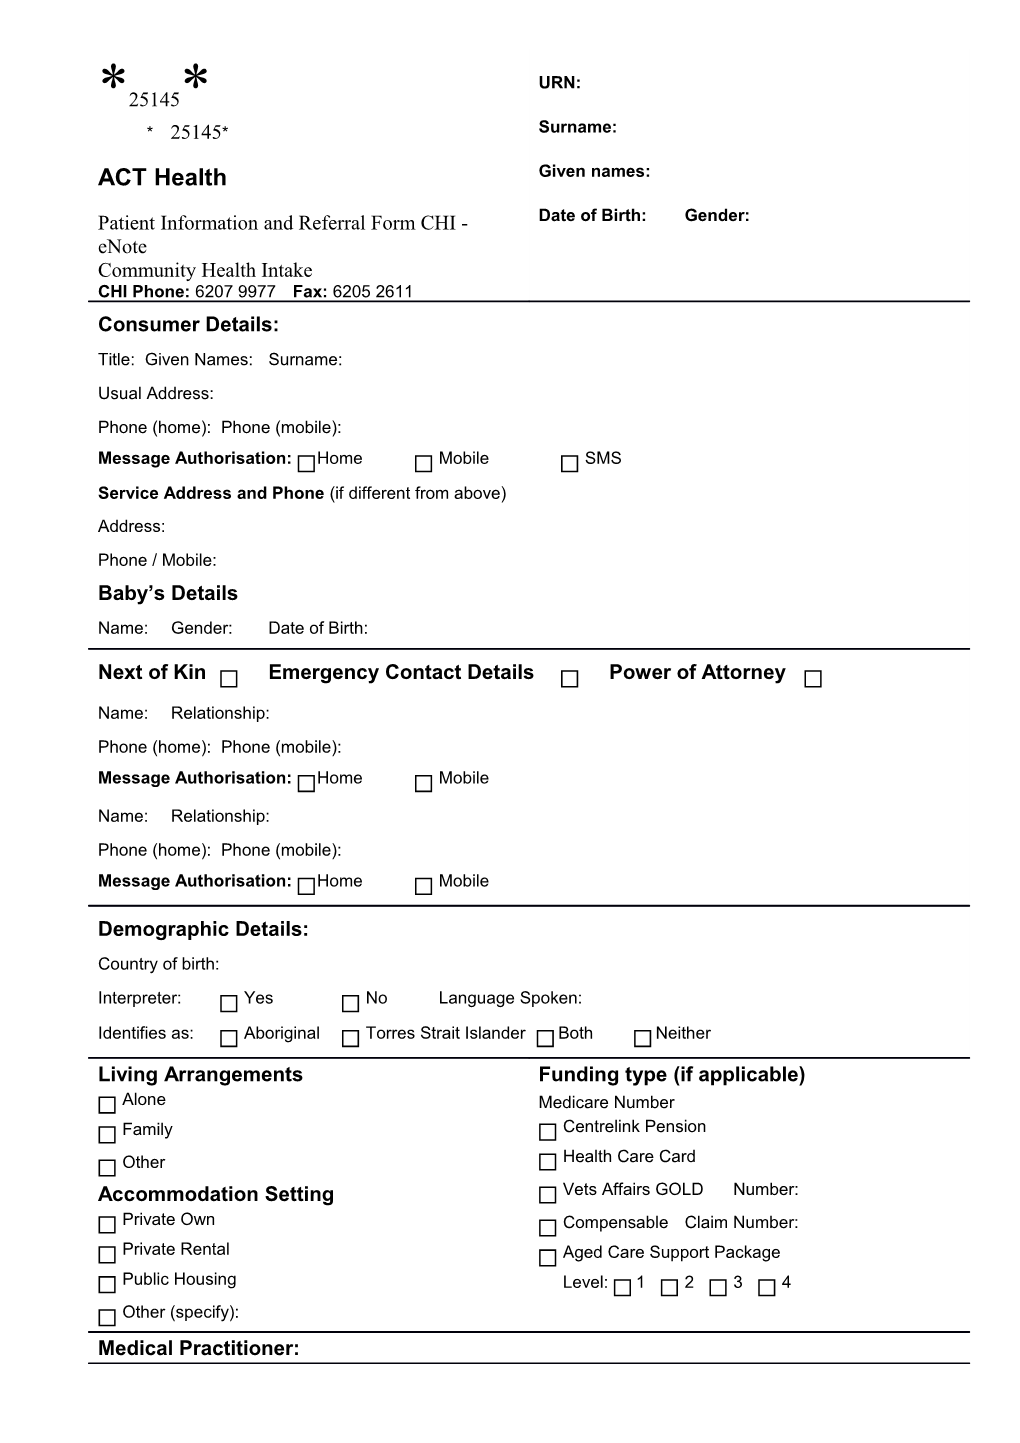 Patient Information and Referral Form CHI - Enote